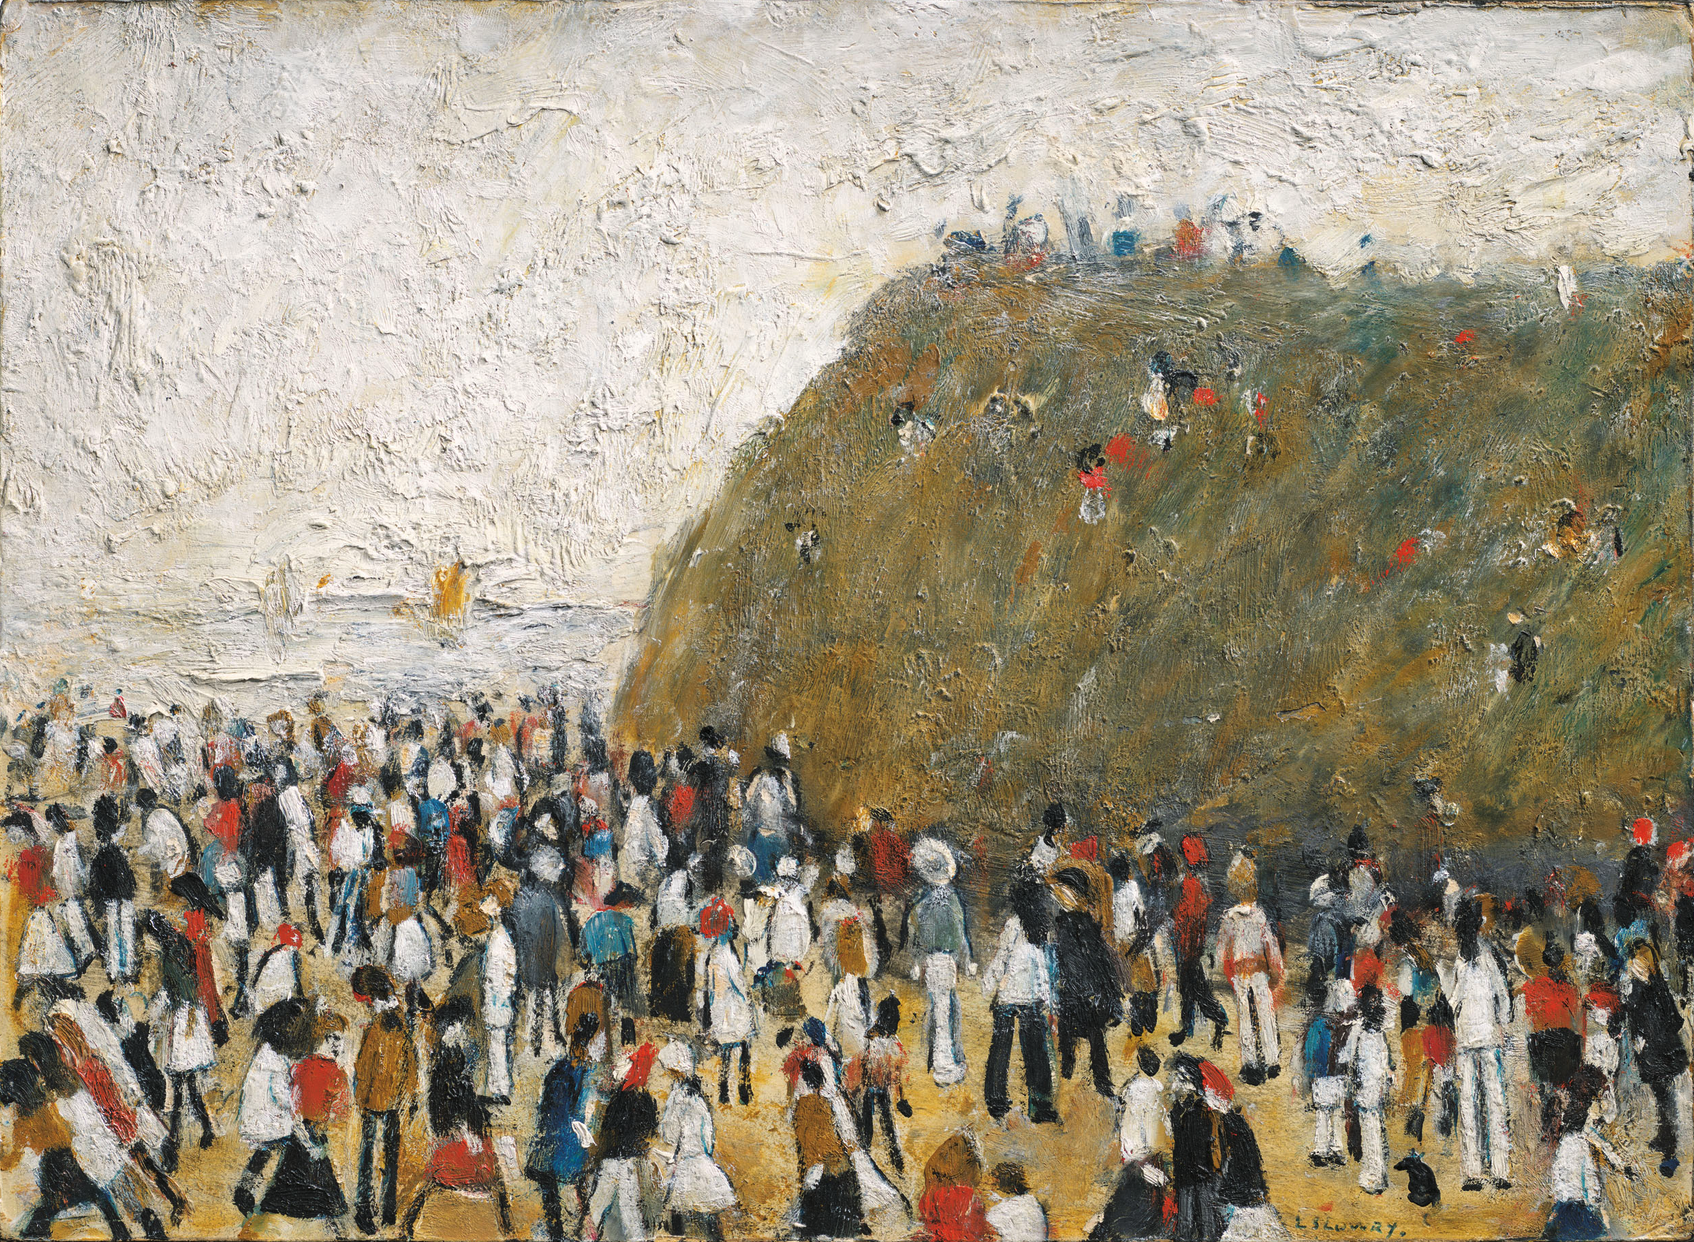 Beach Scene (Unknown) by Laurence Stephen Lowry (1887 - 1976), English artist.